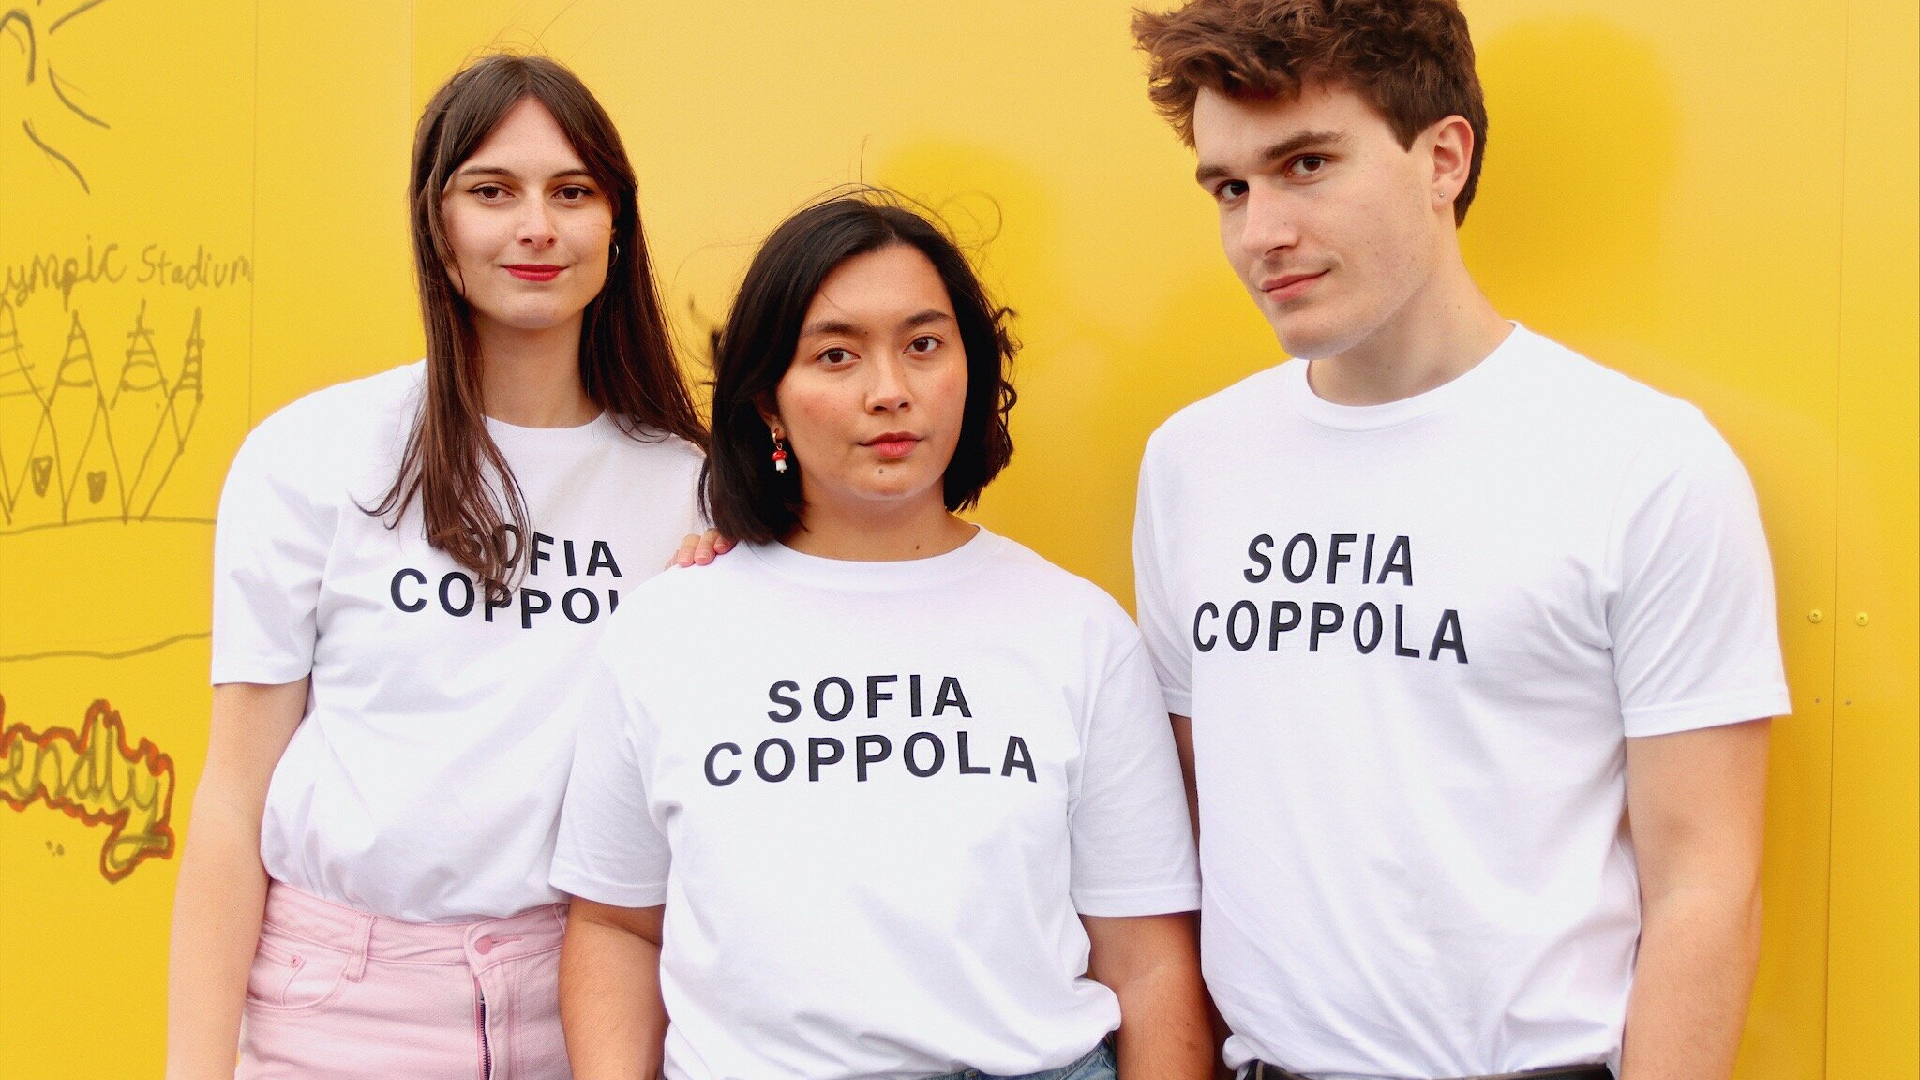 Sofia Coppola T-shirt from Girls on Tops